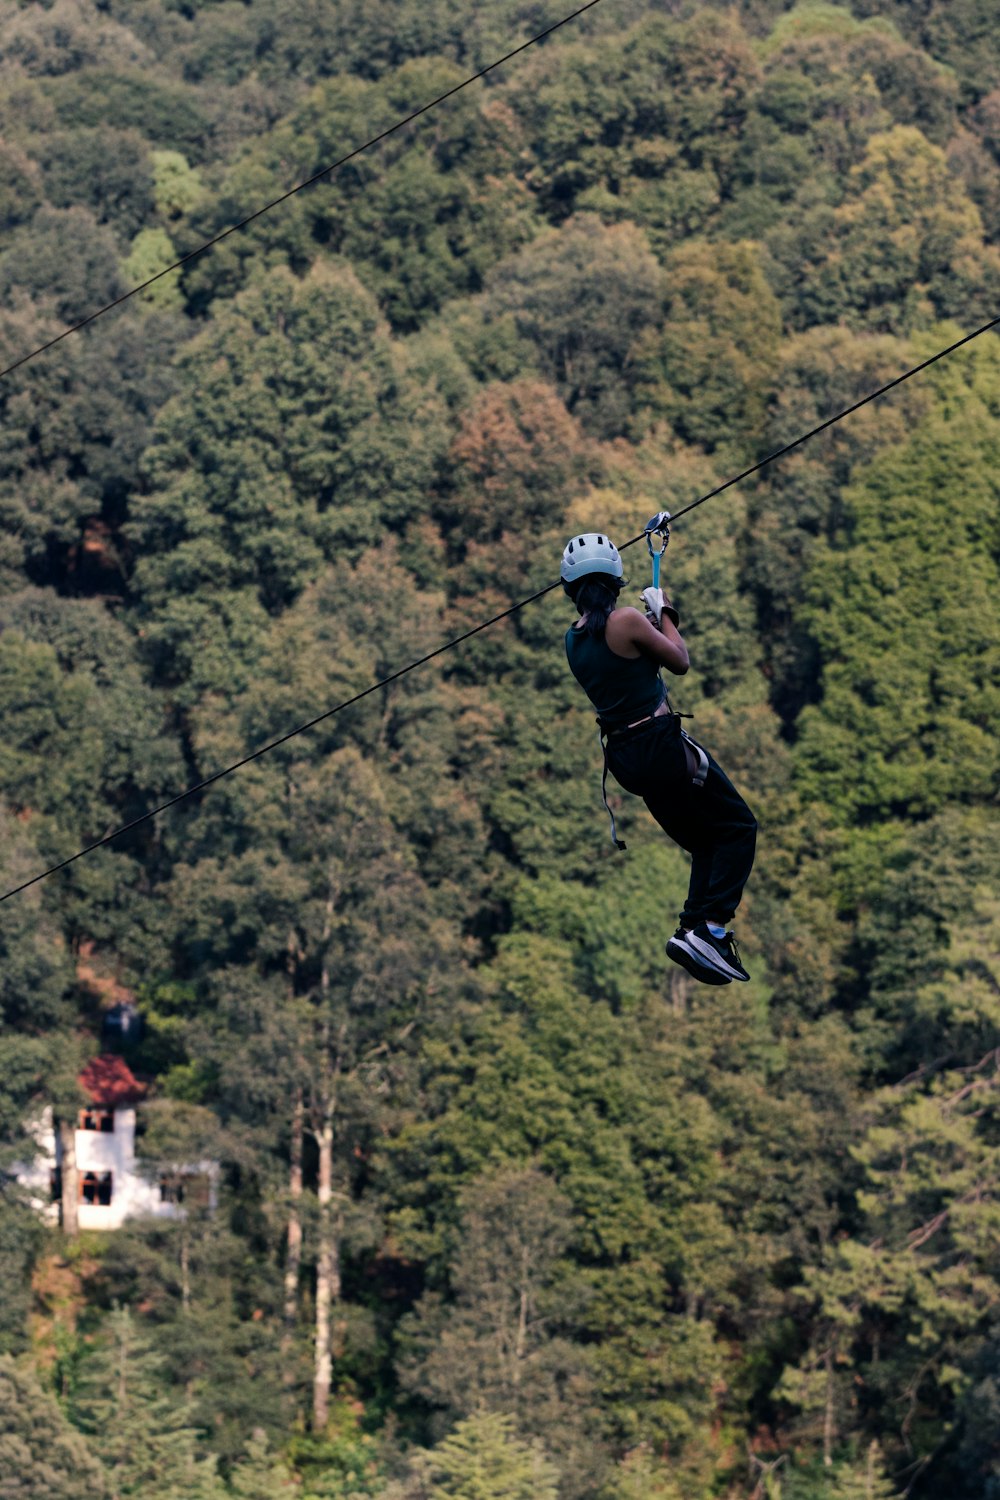 a man riding a zip line over a lush green forest